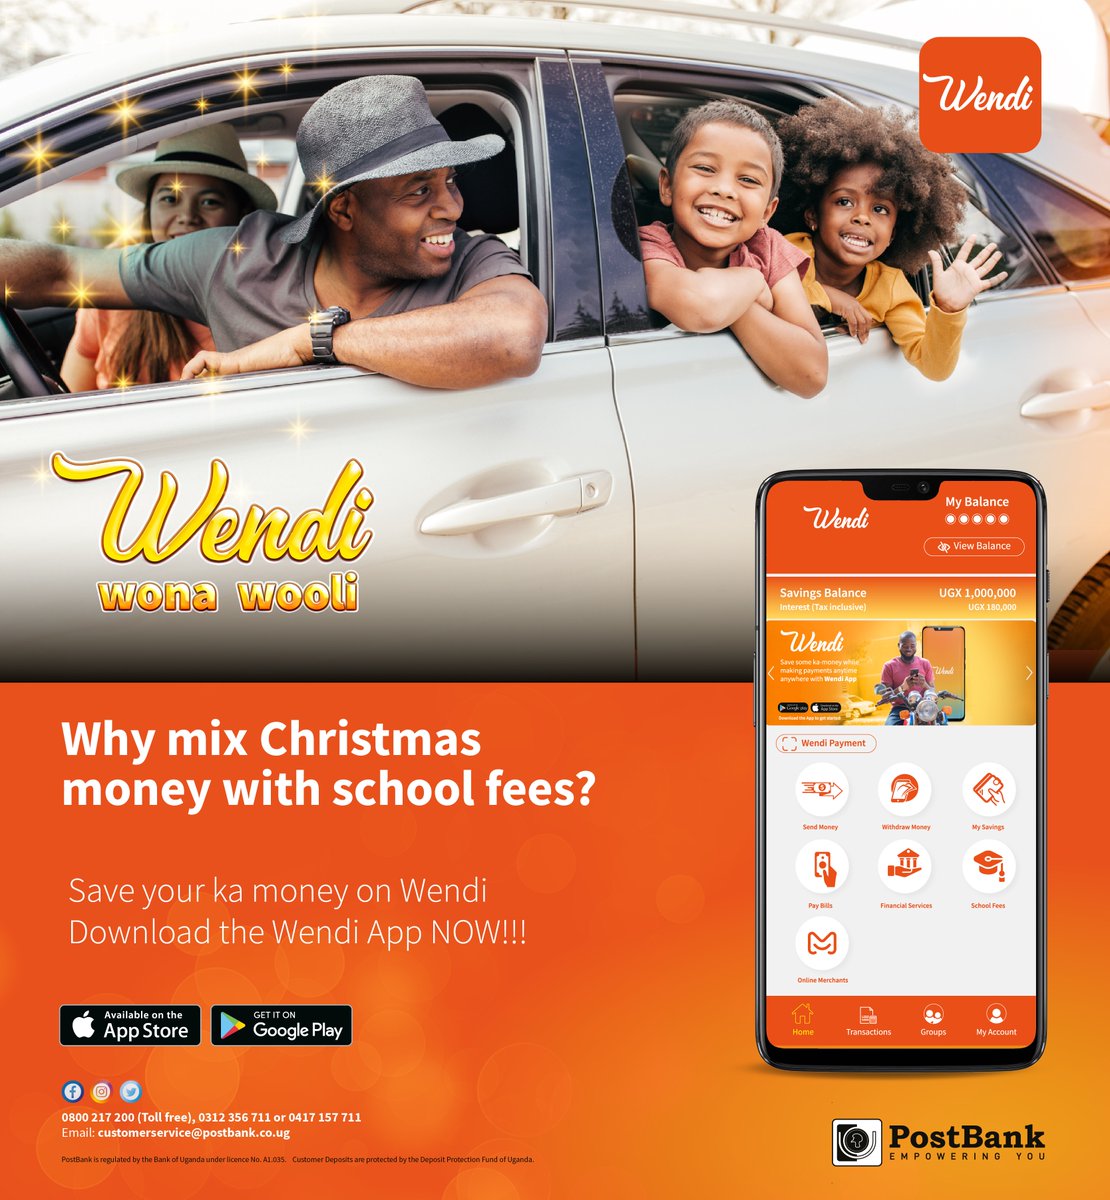 Jingle bills, jingle all the way! Cheers to Christmas with clear bills. Do not let the upcoming January school fees catch you off guard. Save it up with Wendi. #WendiWonaWooli